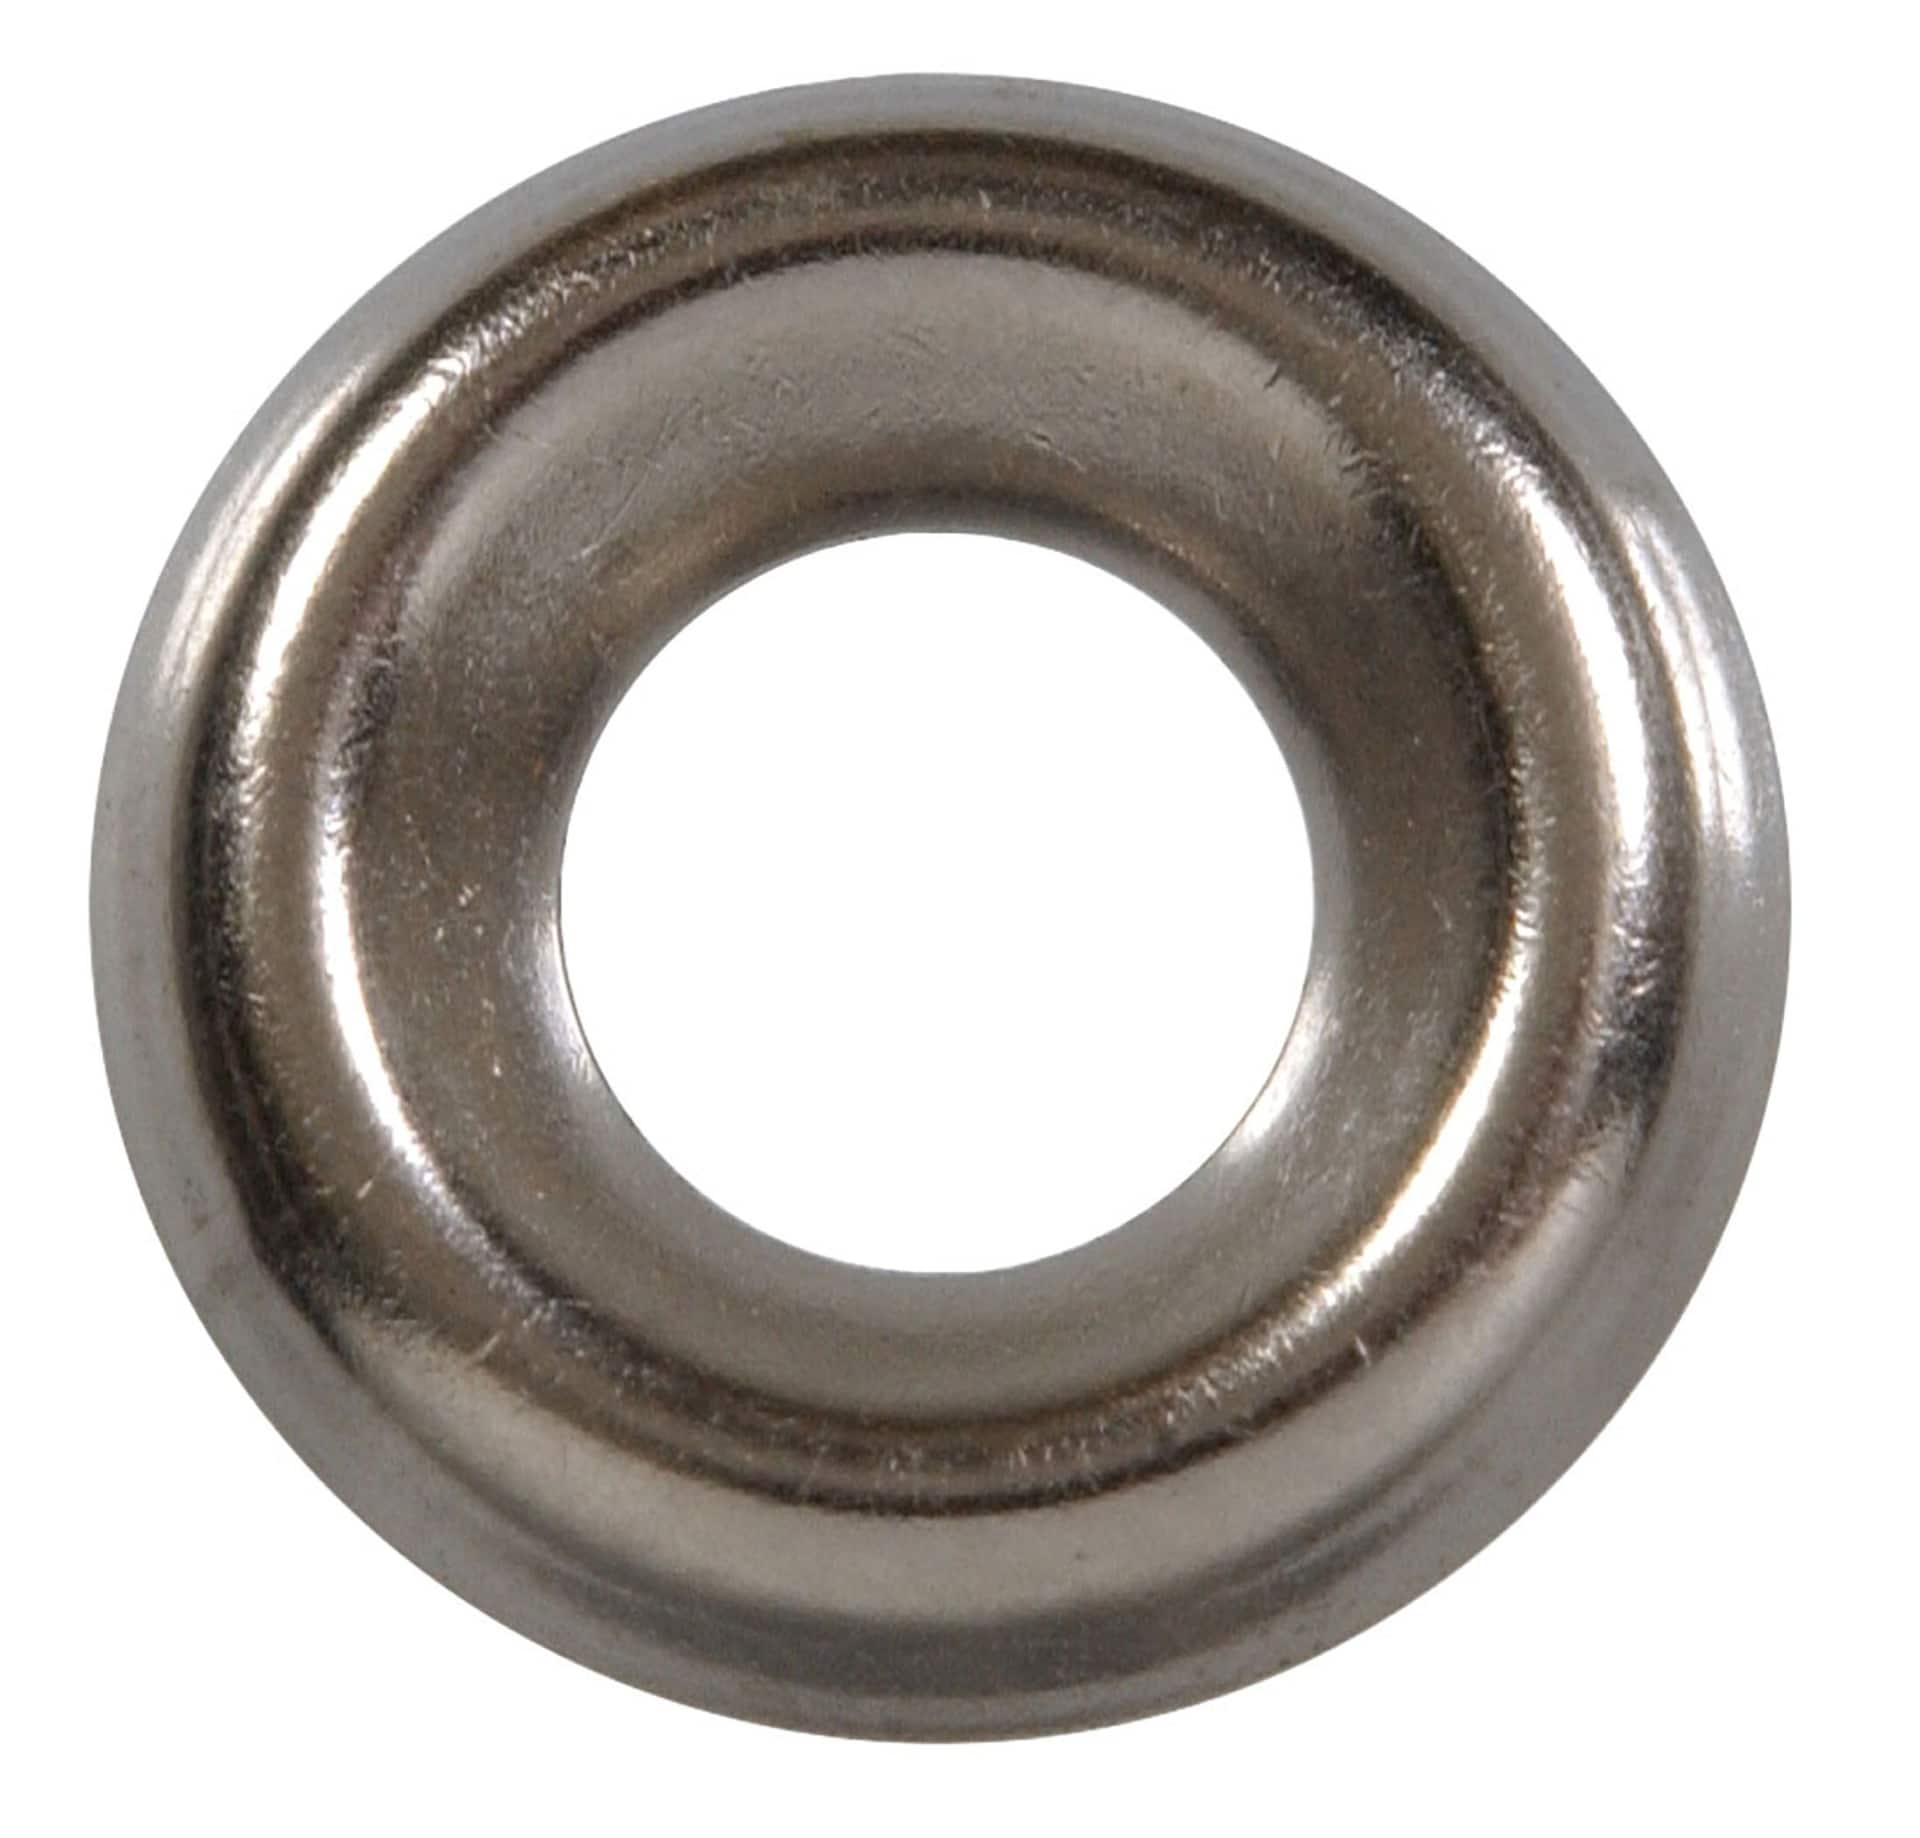 Size 0 Nickel Plated Sheet Metal Grommets and plain washers for tarps,  canopies and covers